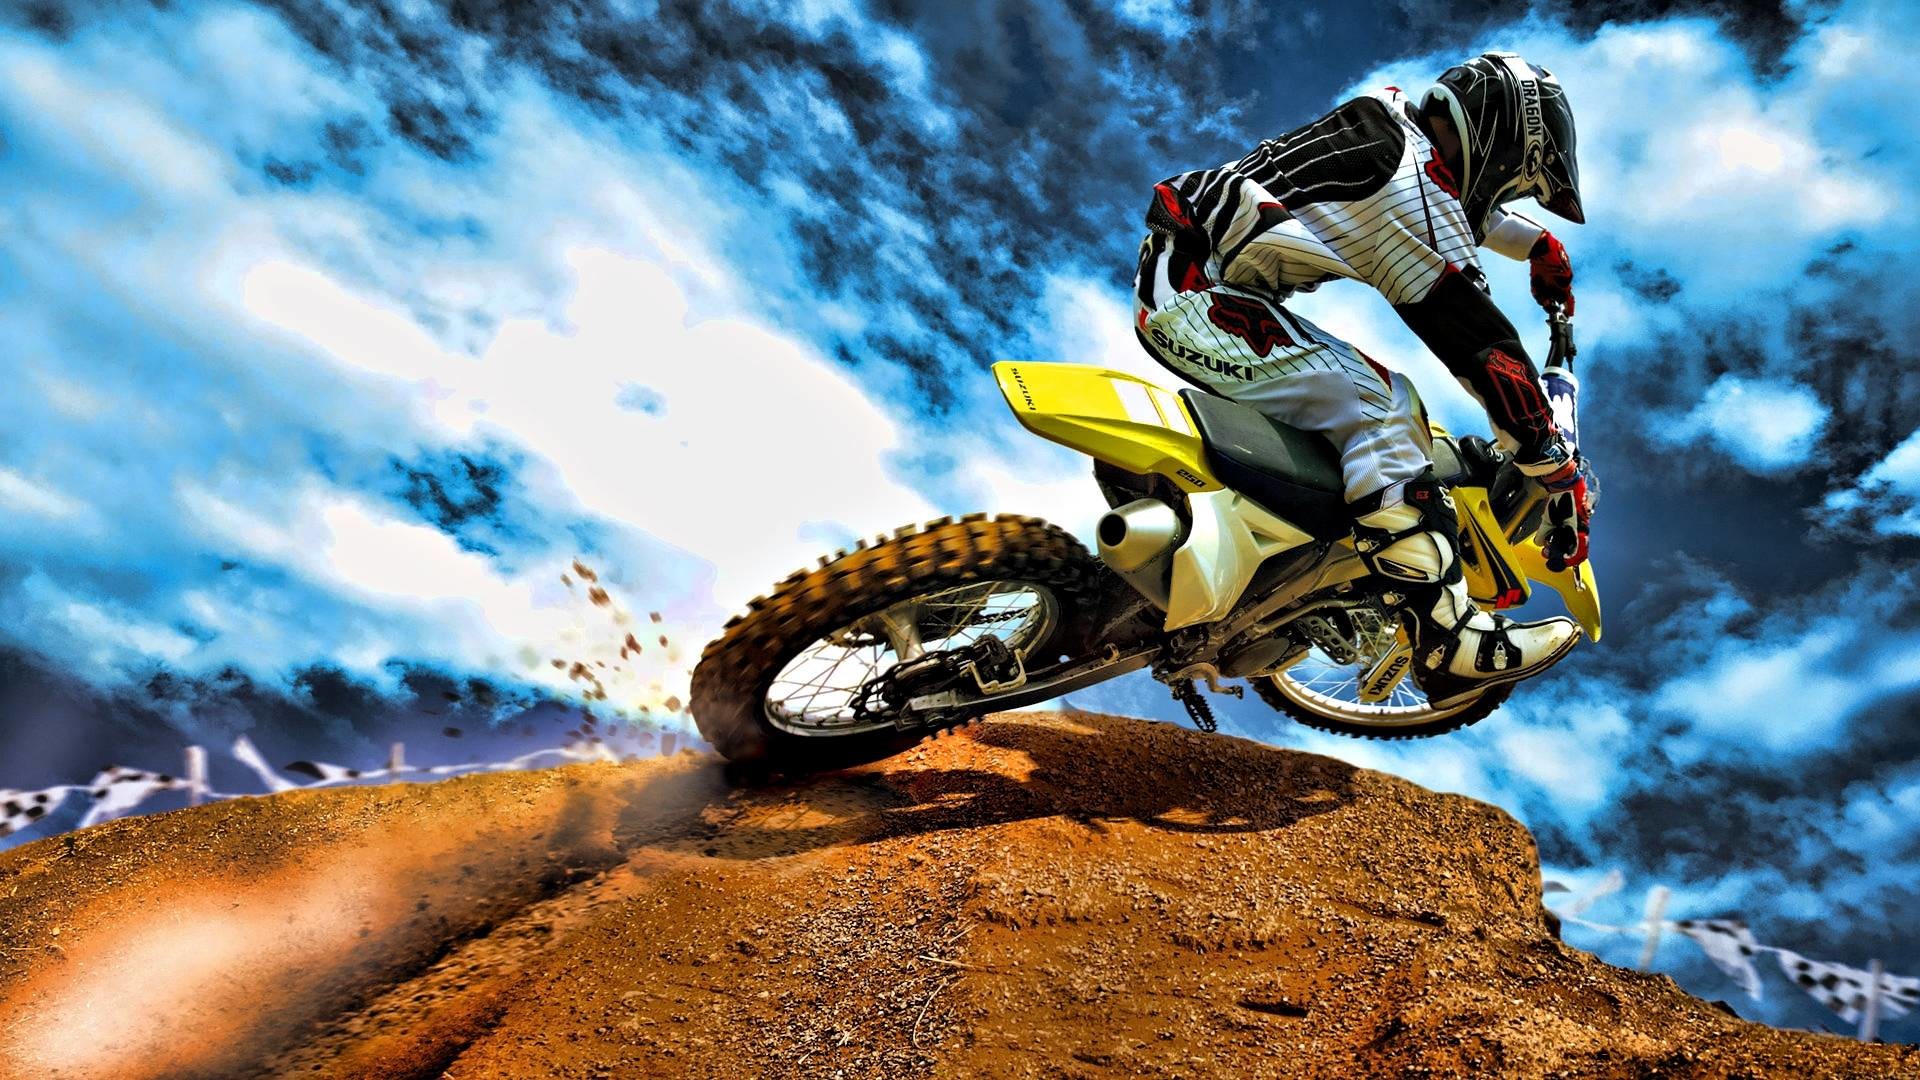 1920x1080 Motocross Wallpapers | HD Wallpapers Early